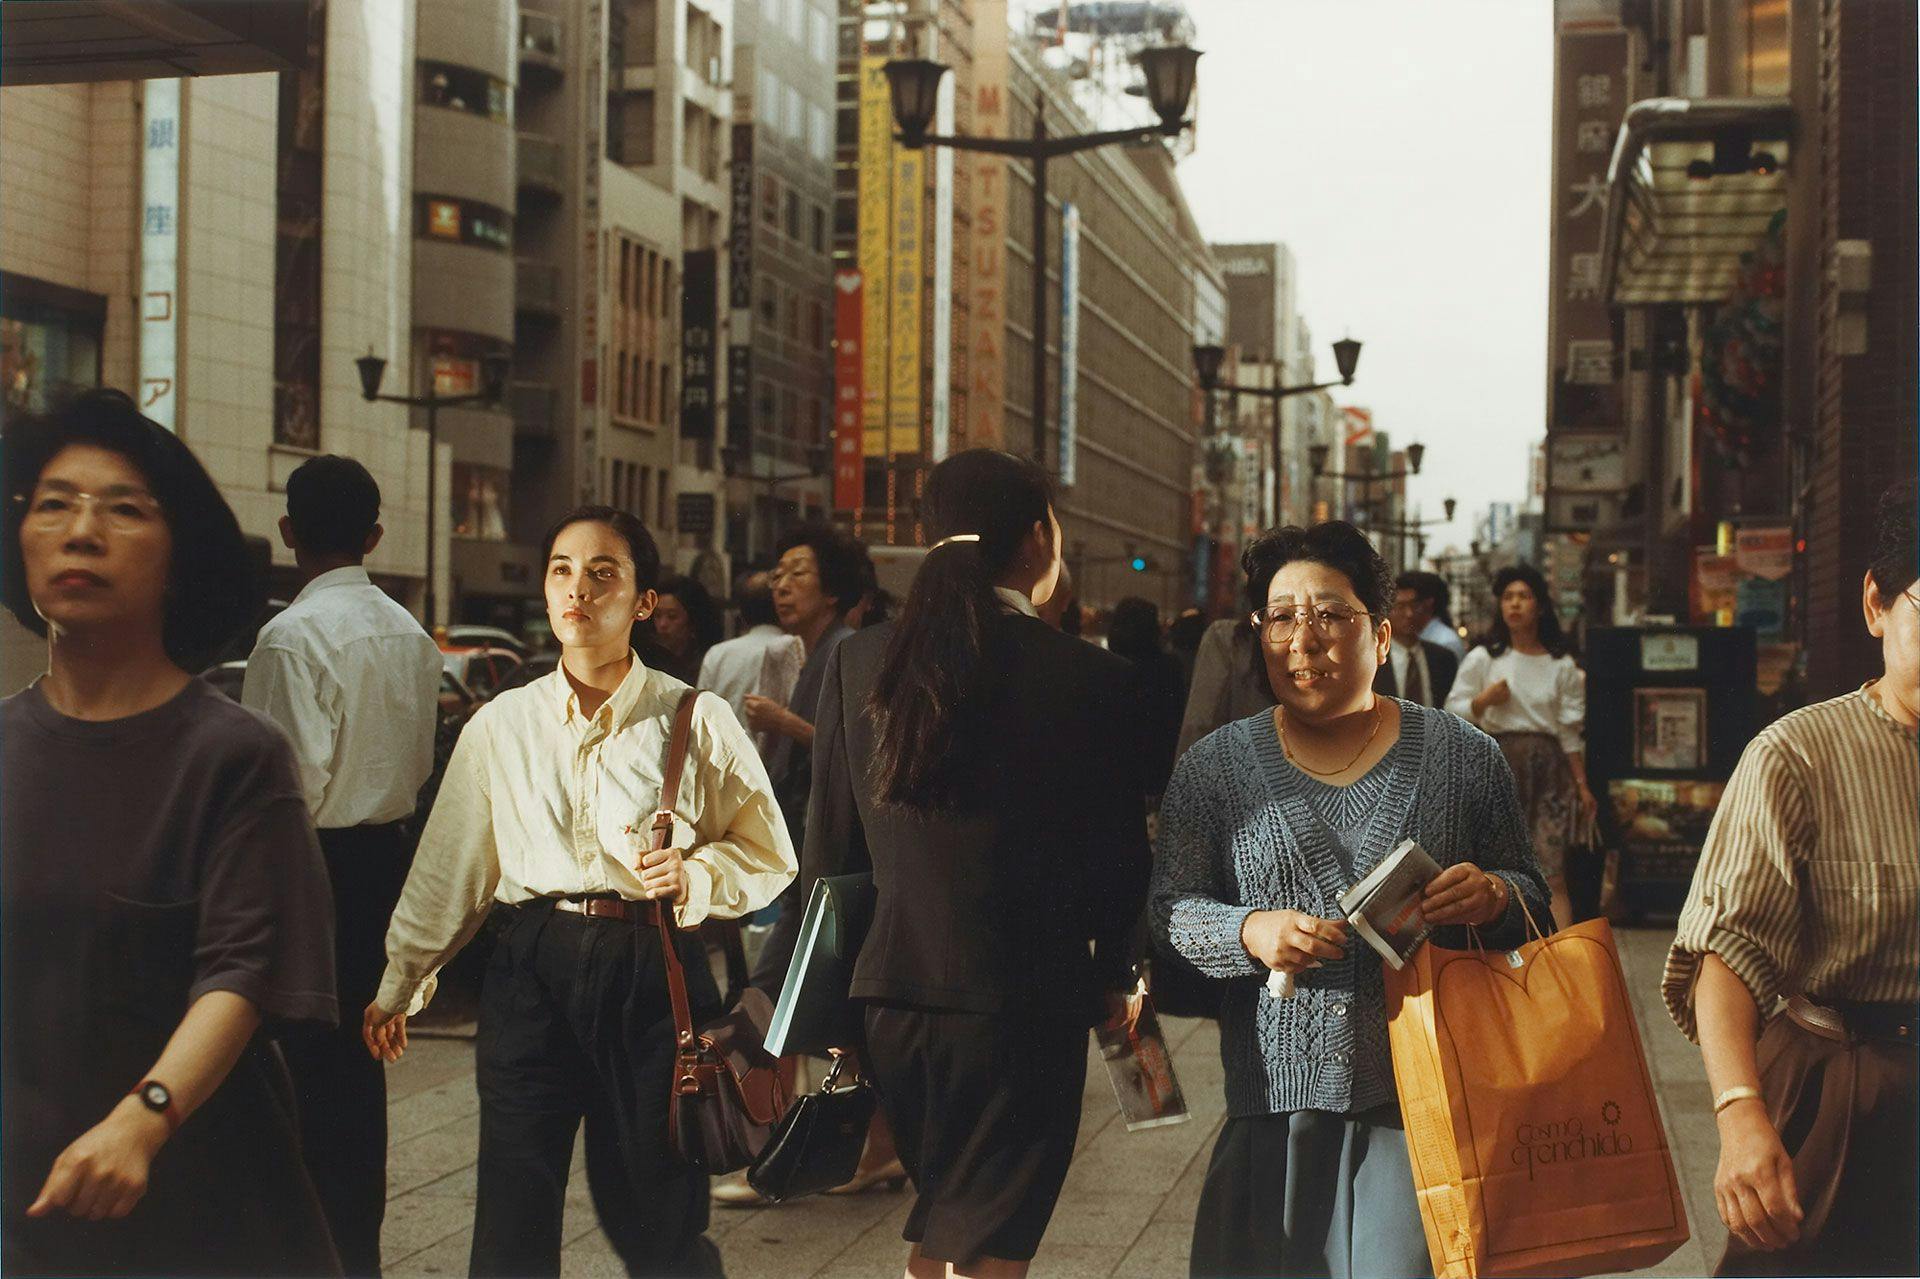 A photograph by Philip-Lorca diCorcia titled Tokyo, dated 1994.